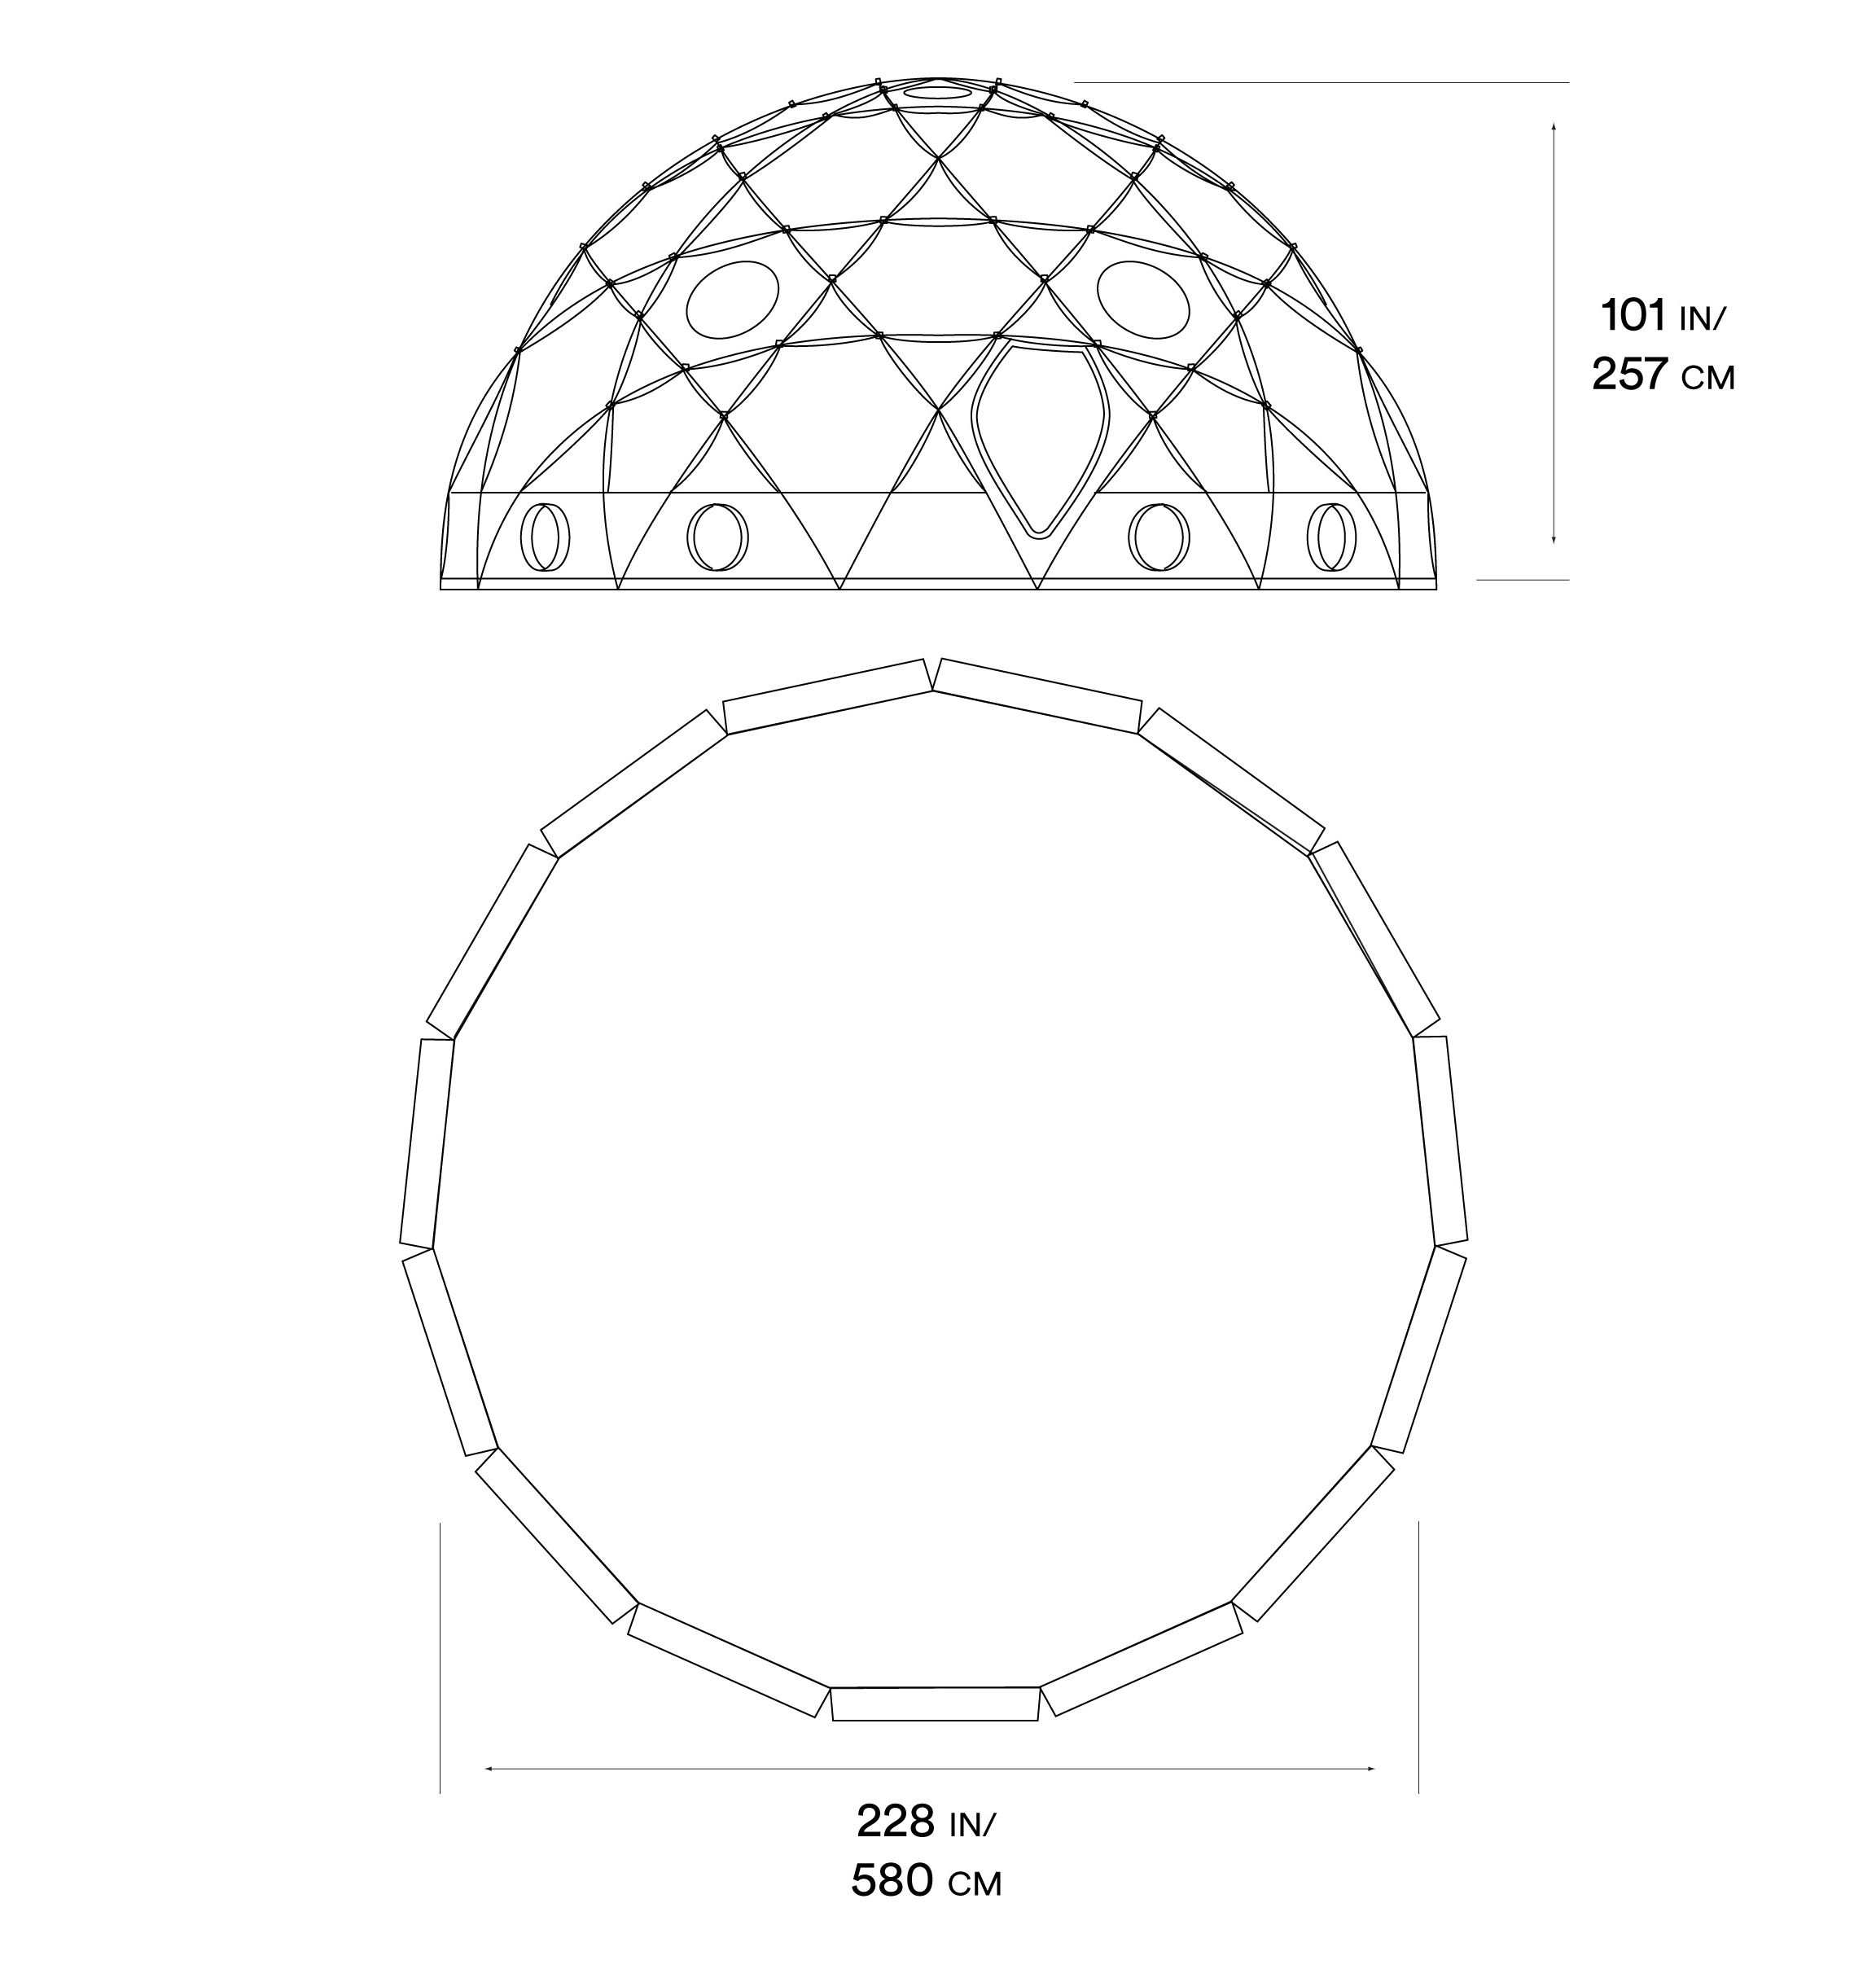 Space Station™ Dome Tent